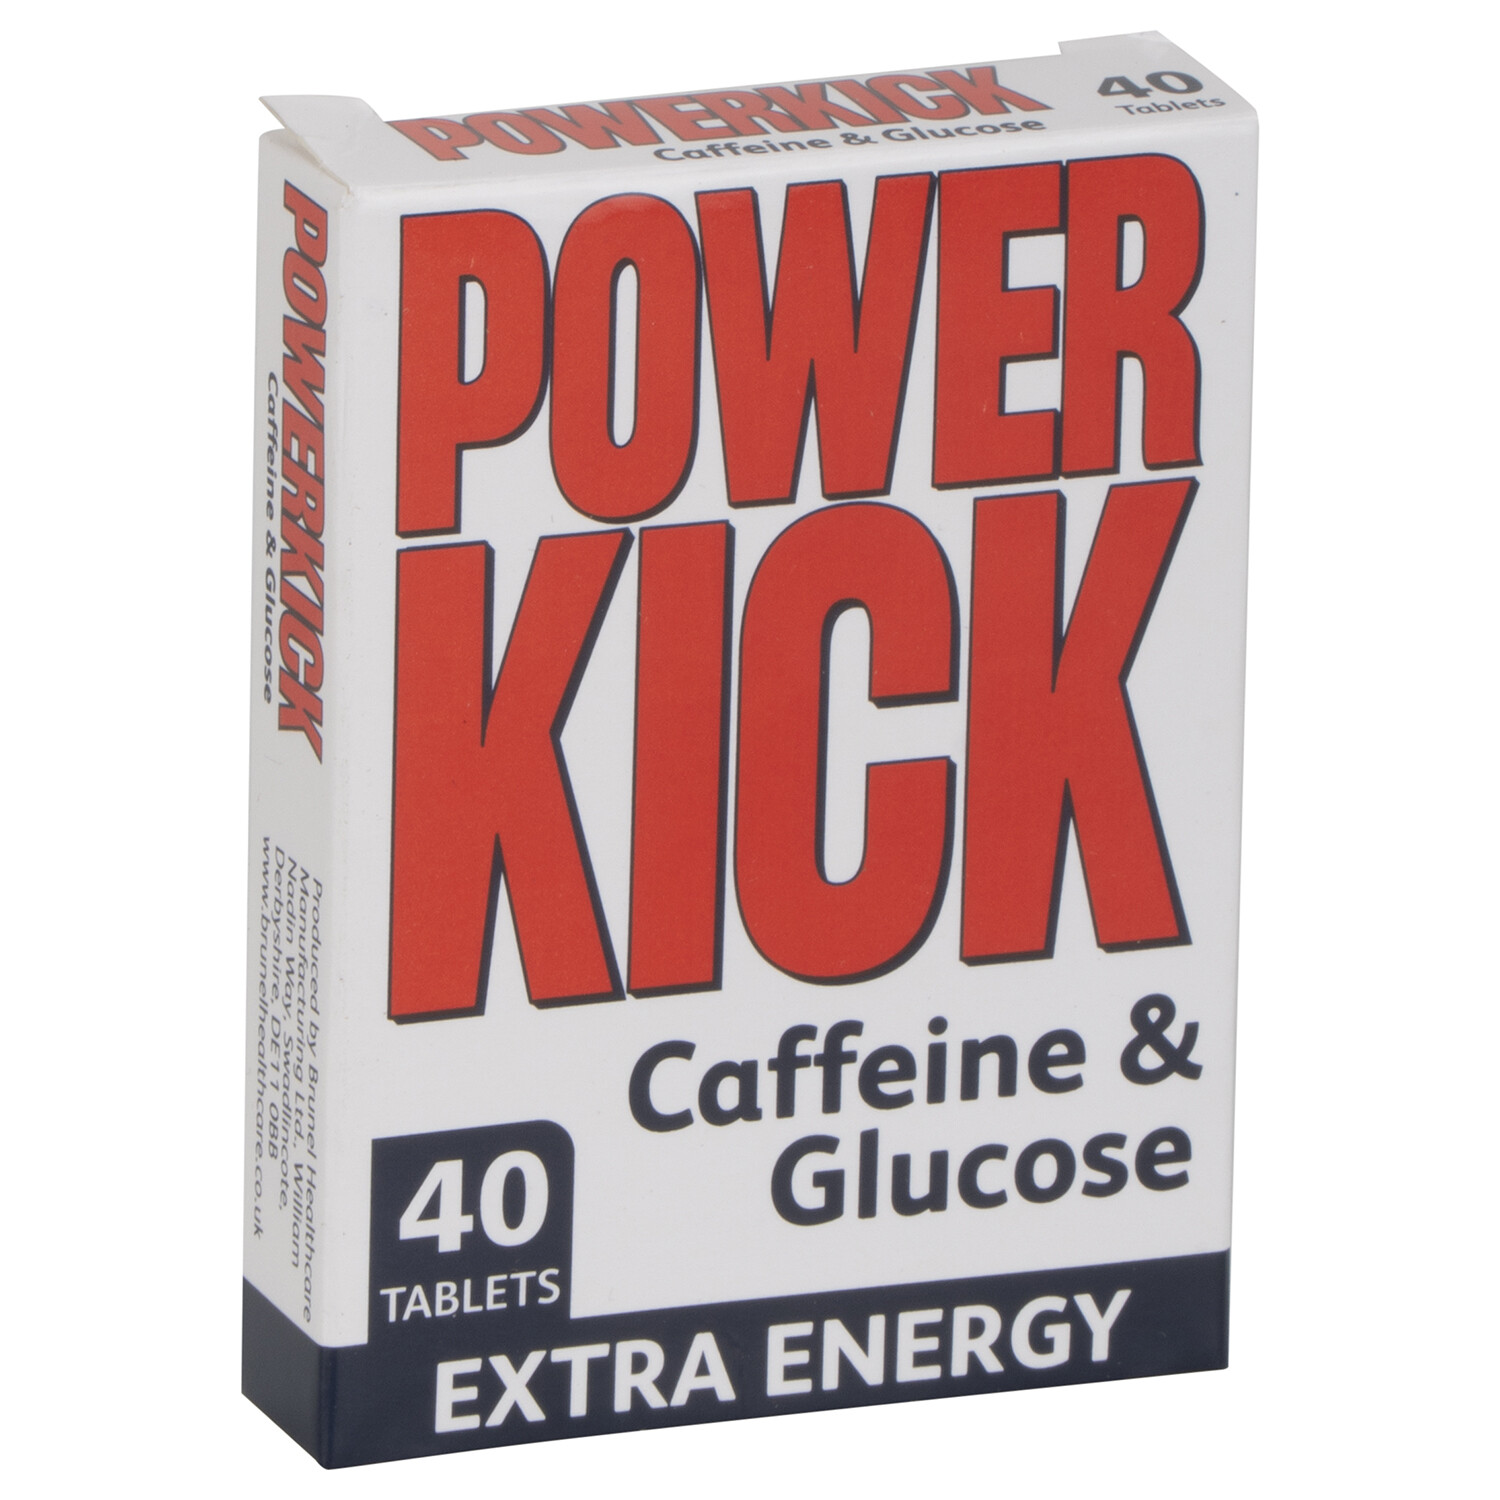 Pack of 40 Power Kick Caffeine and Glucose Tablets Image